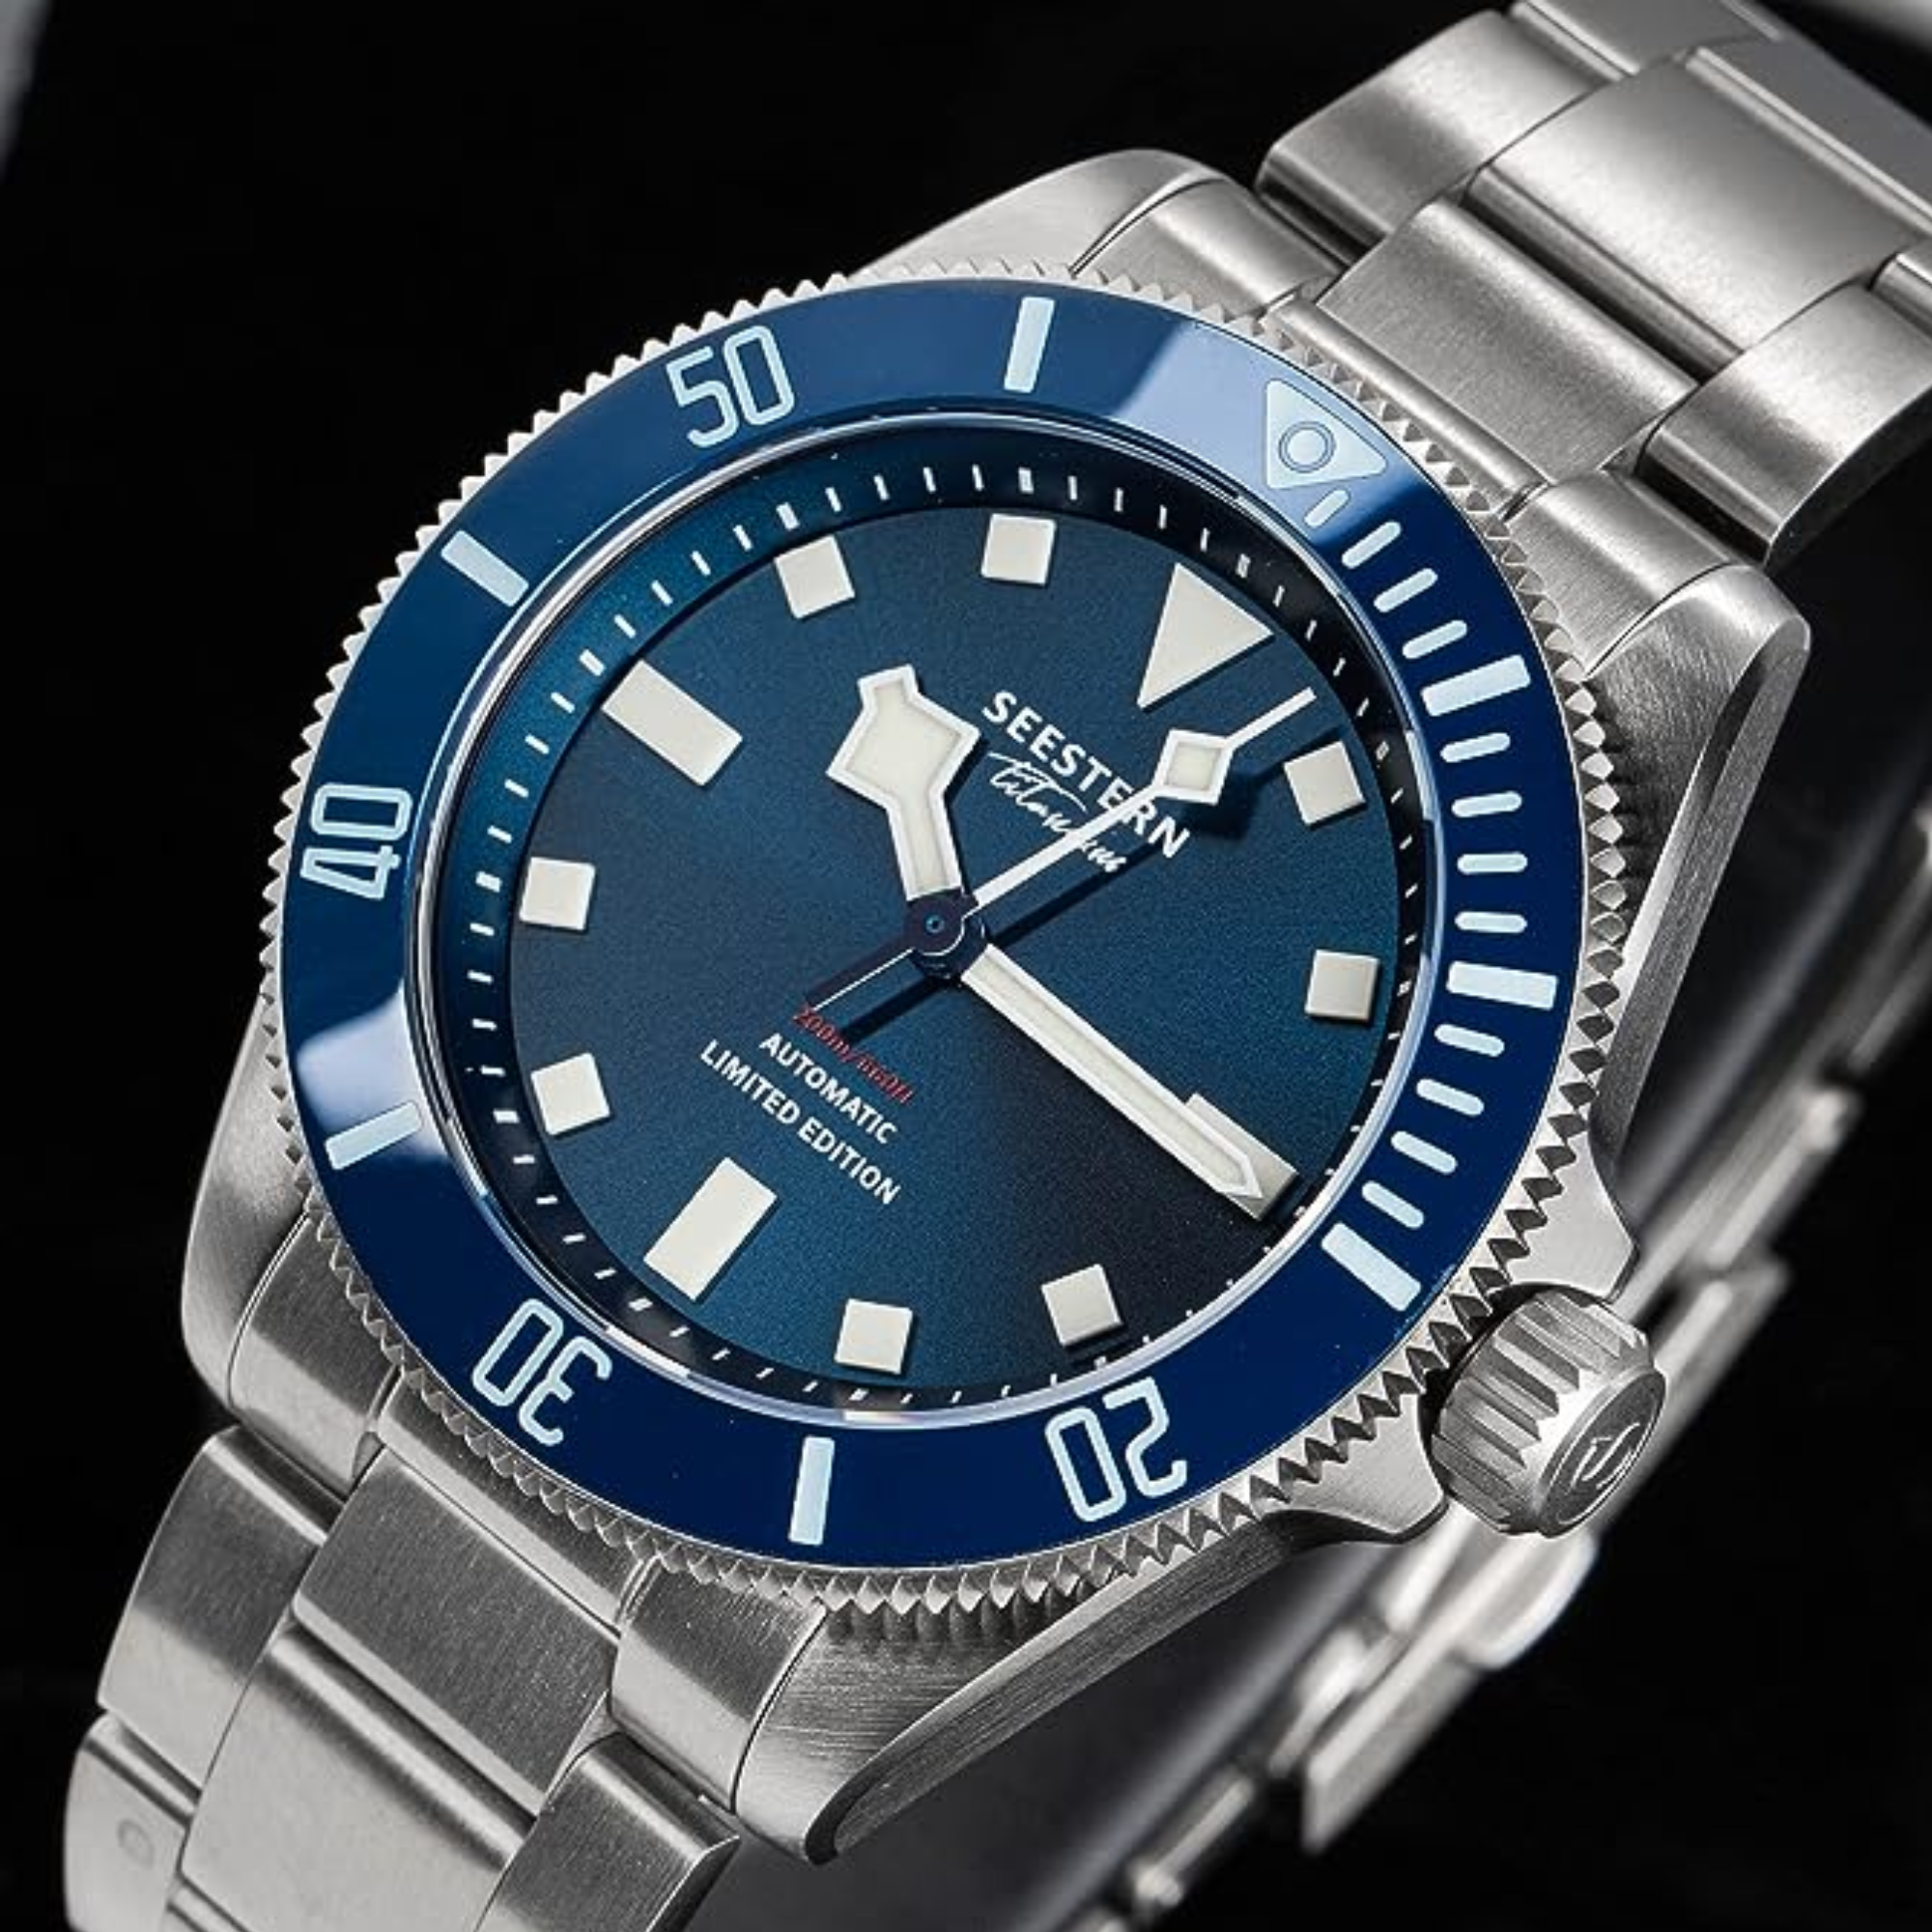 SEESTERN Titaniumn S430.2130.02 Genuine Professional 20ATM Diver Limited Edition Mens Sport Watch -  Blue